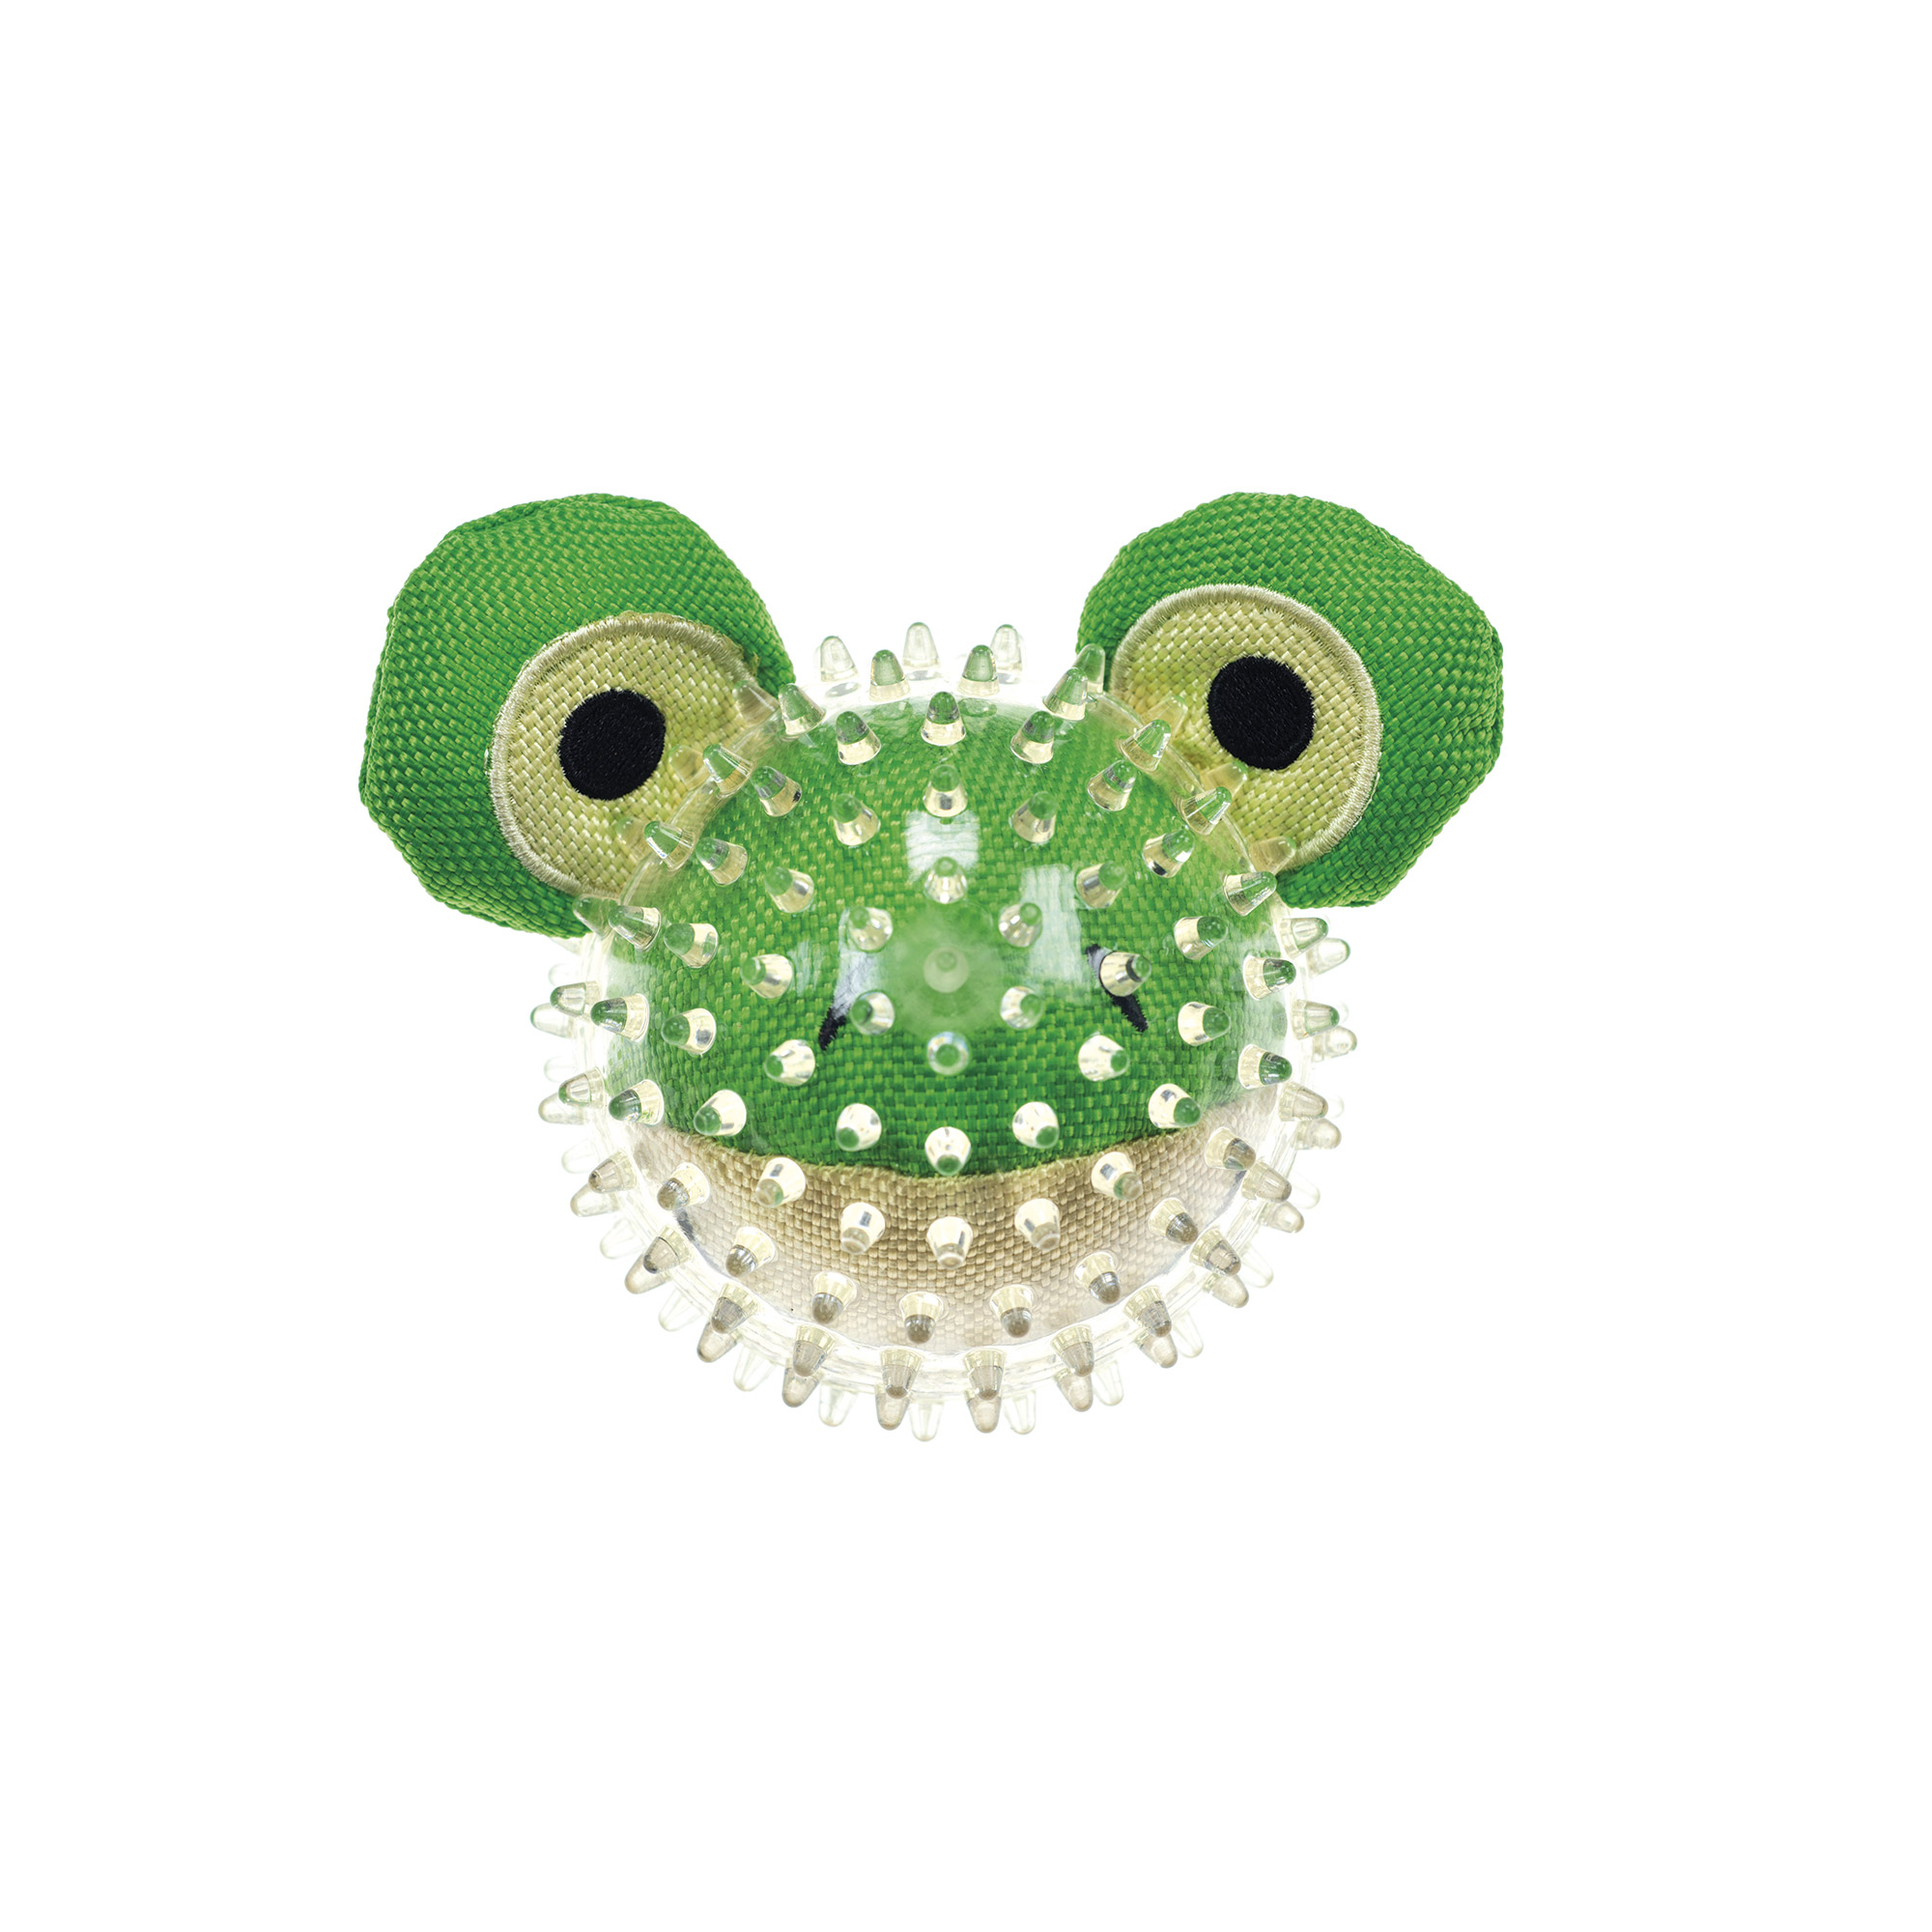 PLASTIC BALL WITH FABRIC FROG 2 IN 1 TOY-0